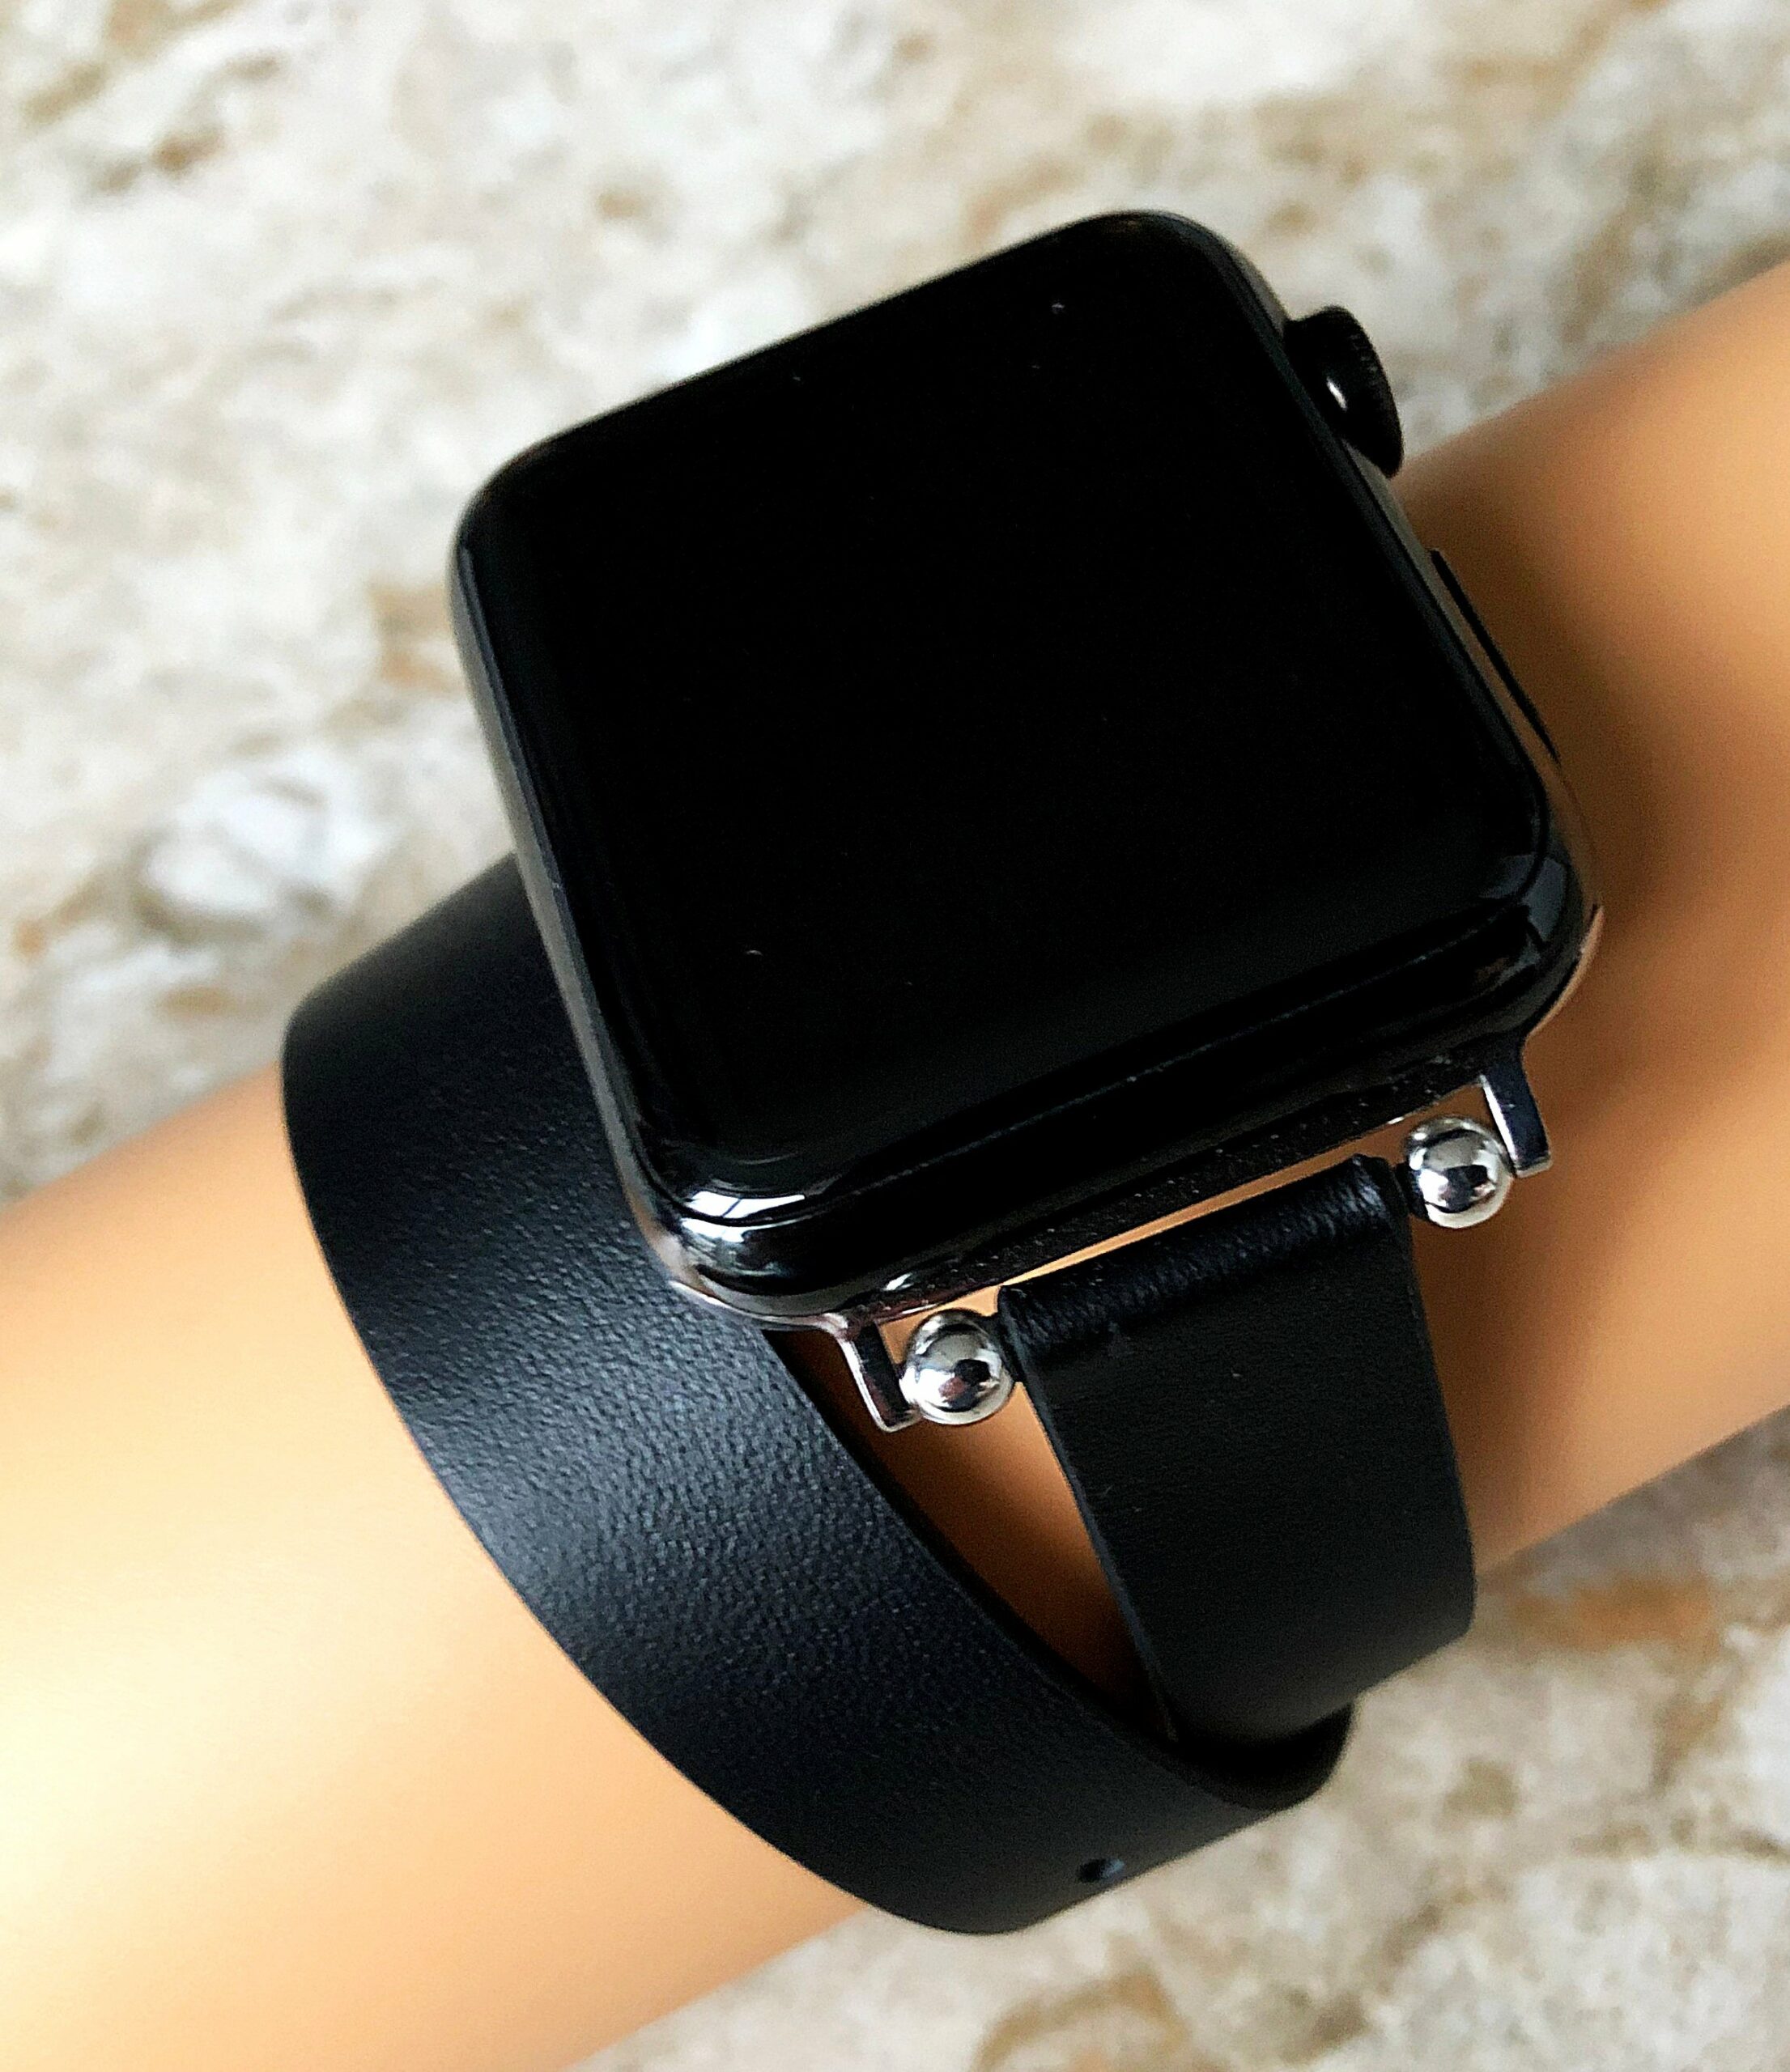 hermes 44mm apple watch band